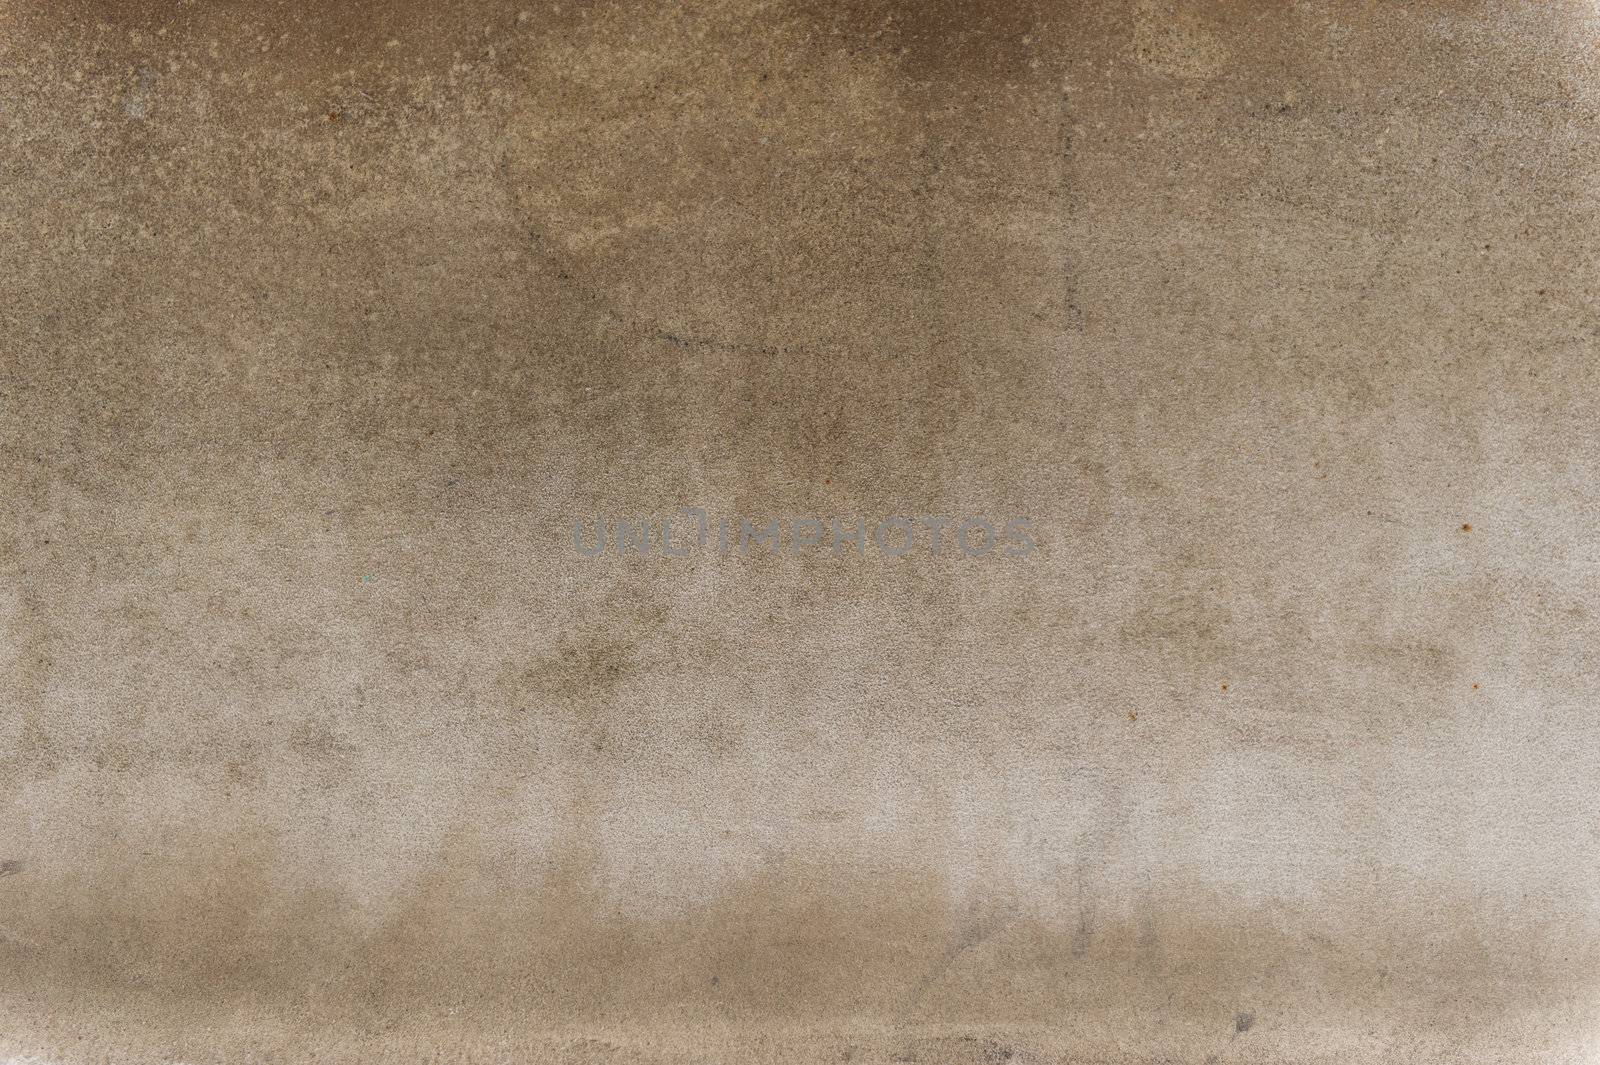 Background texture. Concrete wall